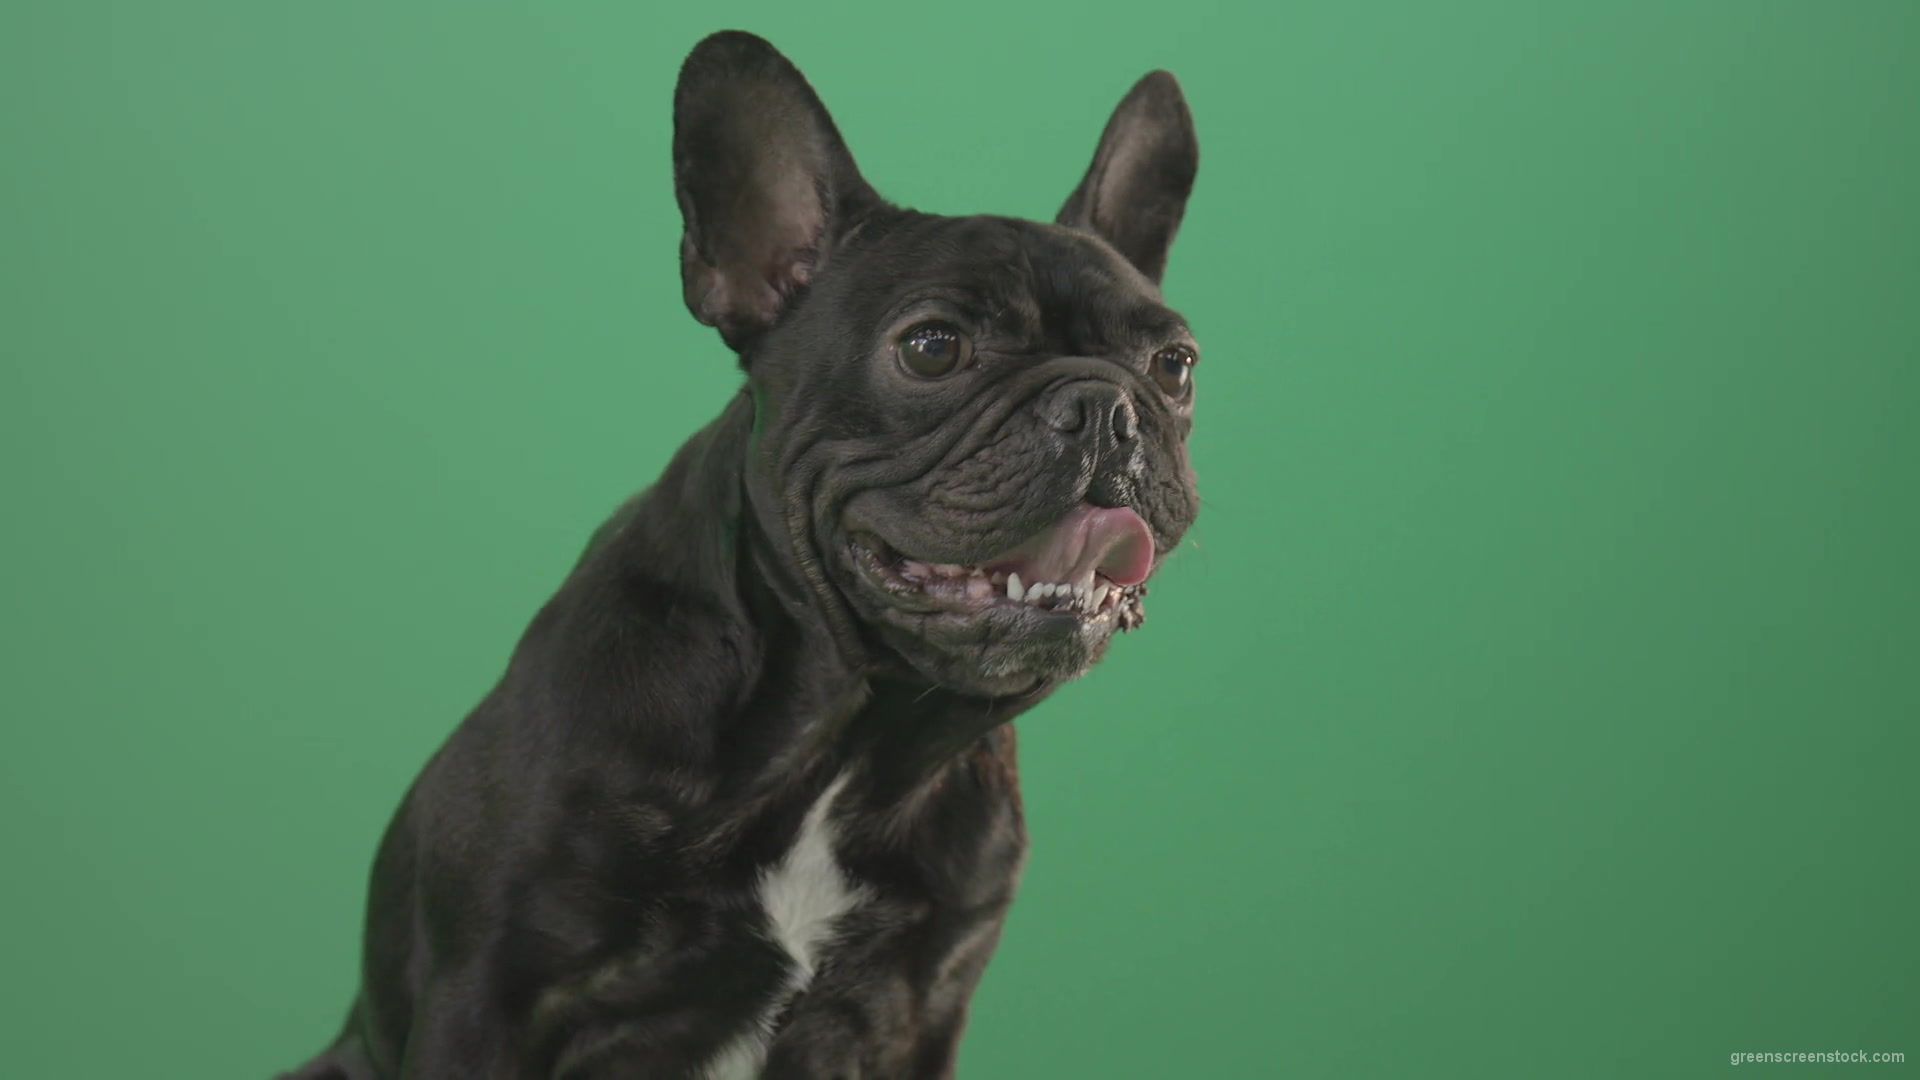 Face-portrait-of-scared-french-bulldog-toy-dog-isolated-on-green-screen-1920_006 Green Screen Stock